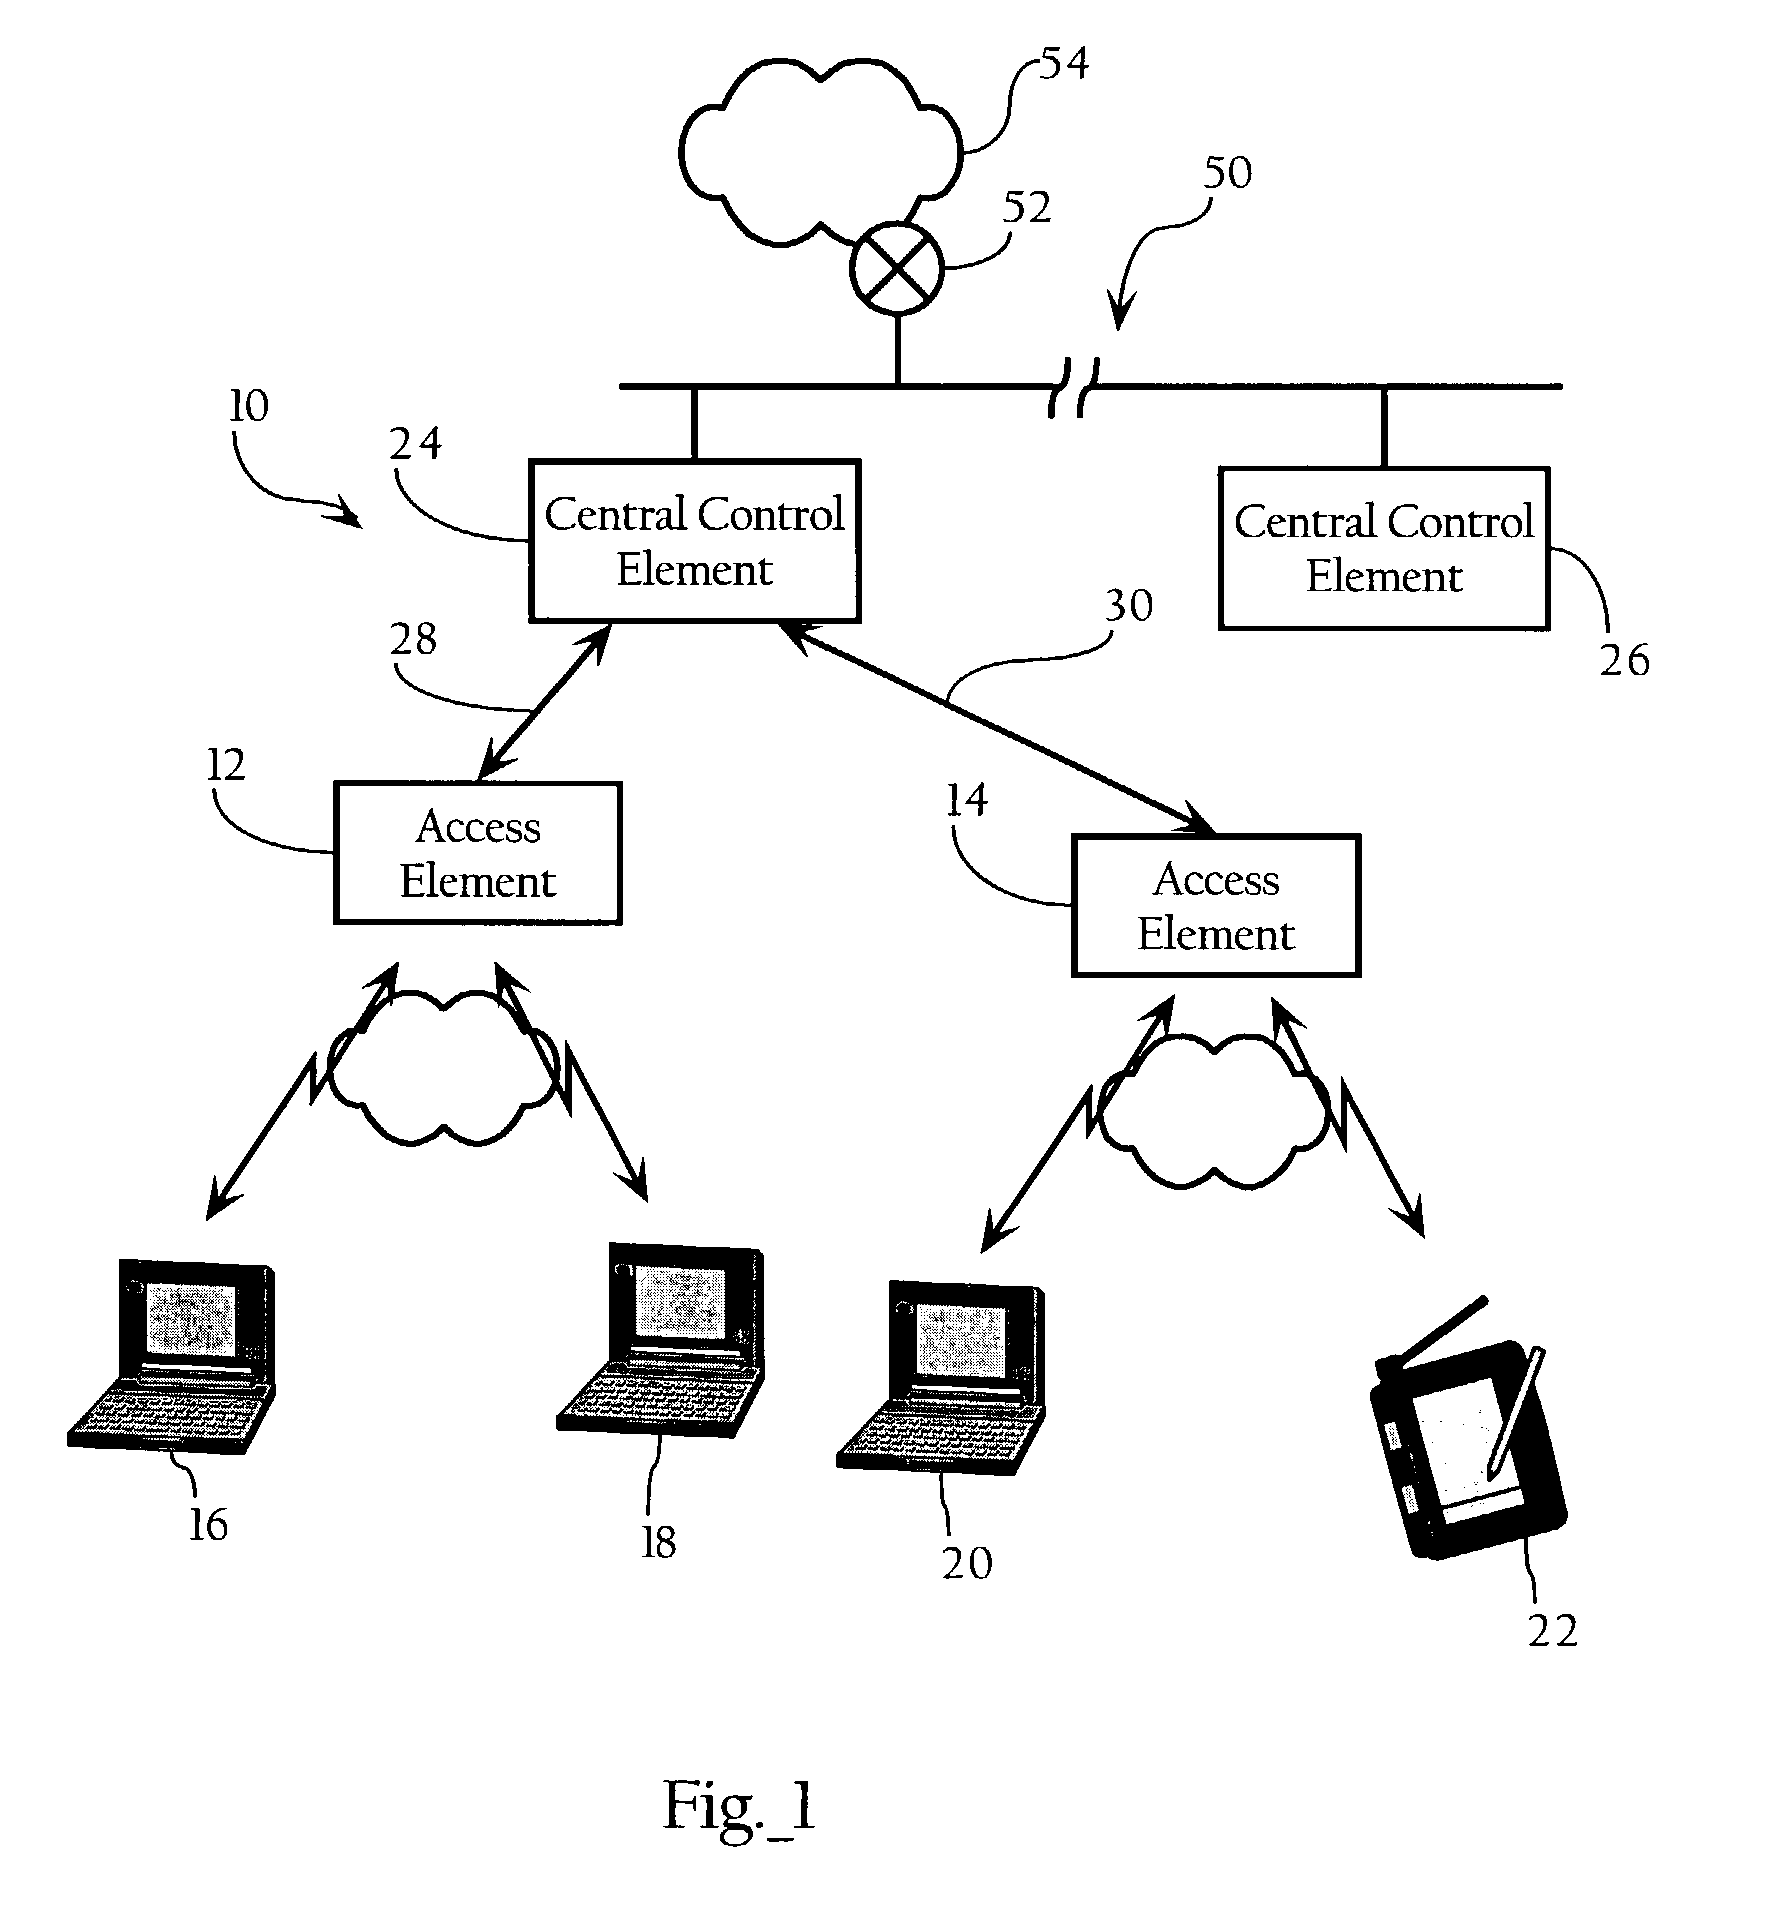 Automatic coverage hole detection in computer network environments